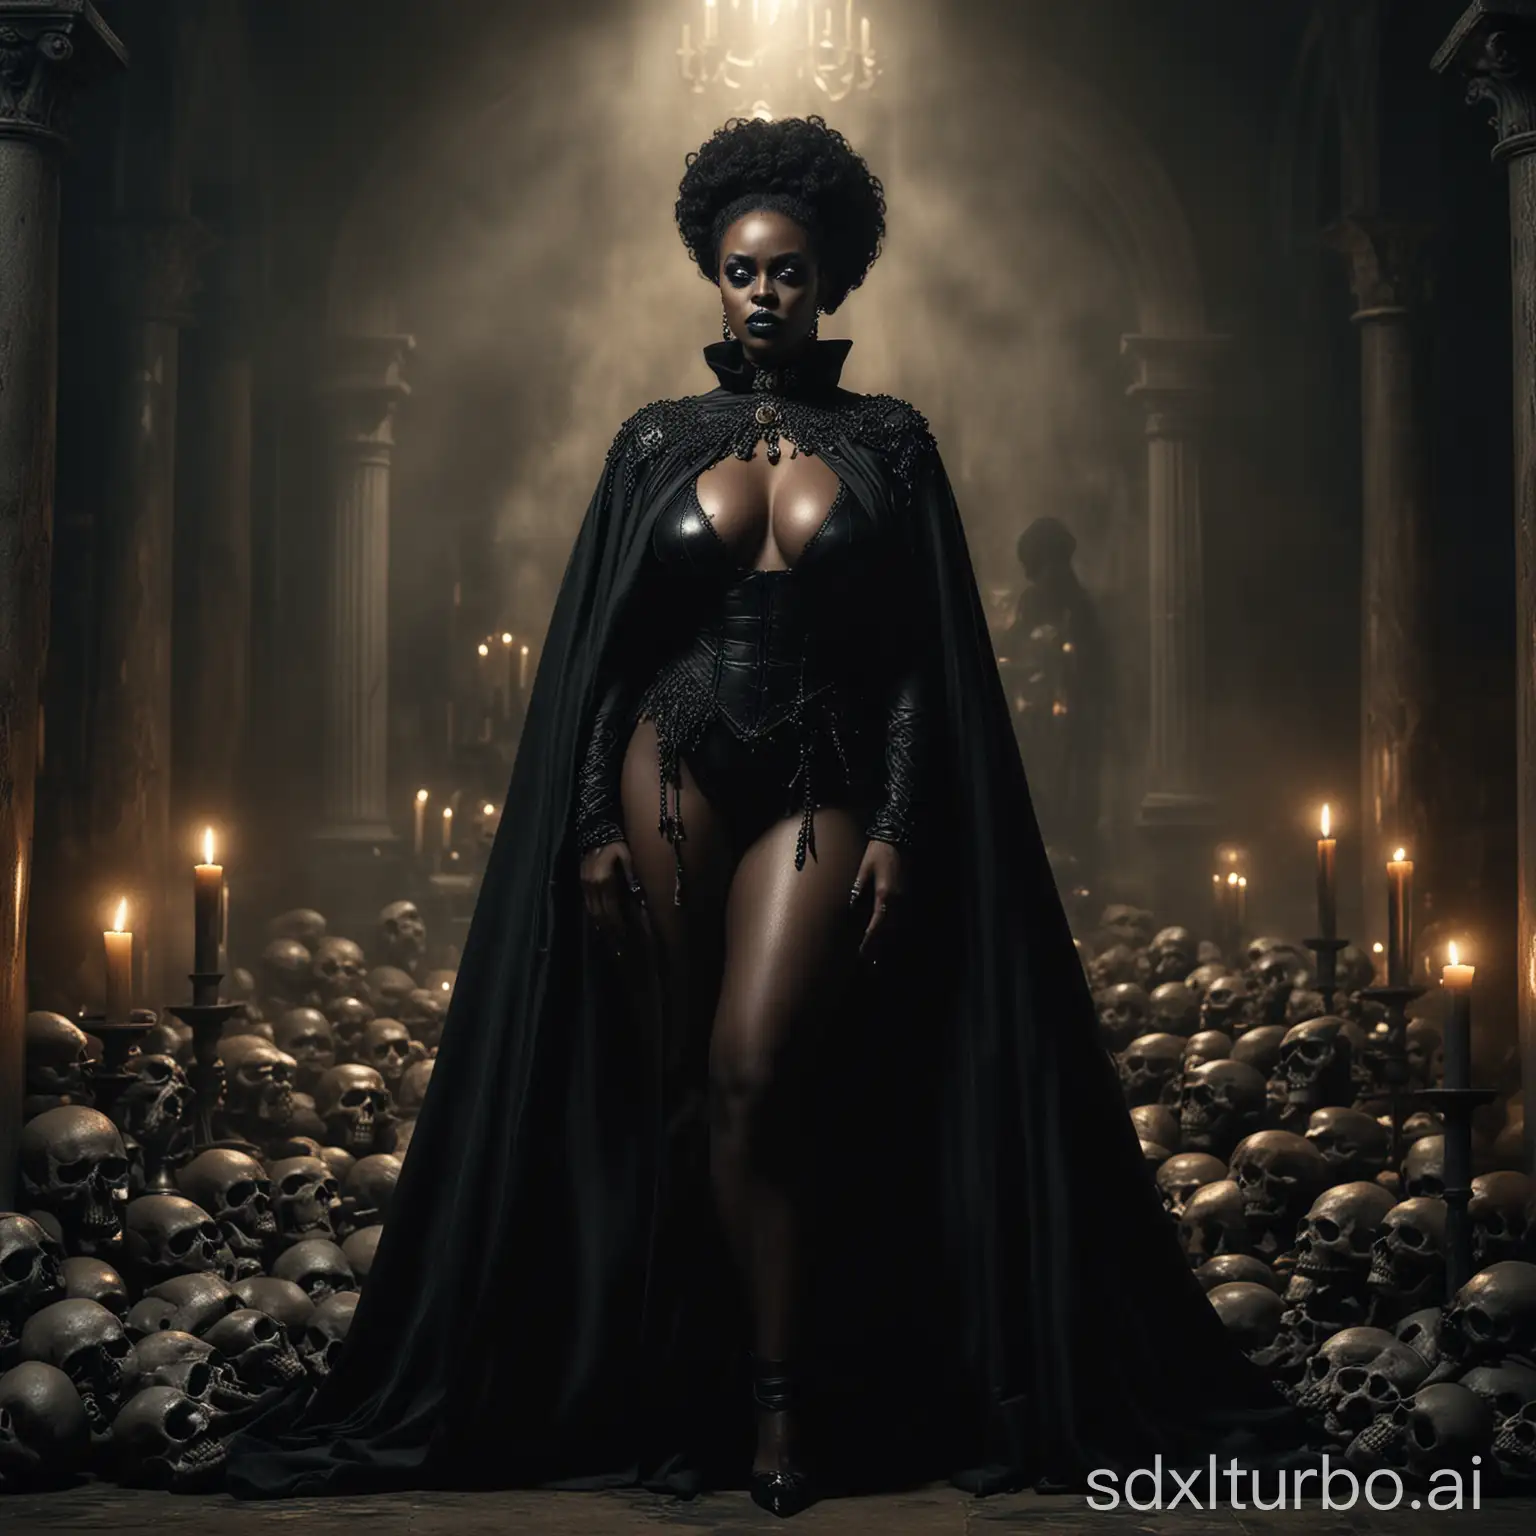 a majestic and powerful black woman, black makeup, EXTREME large breasts exuding an aura of authority. Her imposing presence is accentuated by an air of mystique. Her dark costume and black cape with a high collar further accentuate her imposing presence, she is standing wearing high heels. The enchanting atmosphere is deepened by two skulls on either side, each with a lit black candle that casts mysterious shadows. This captivating scene masterfully combines mystery and power